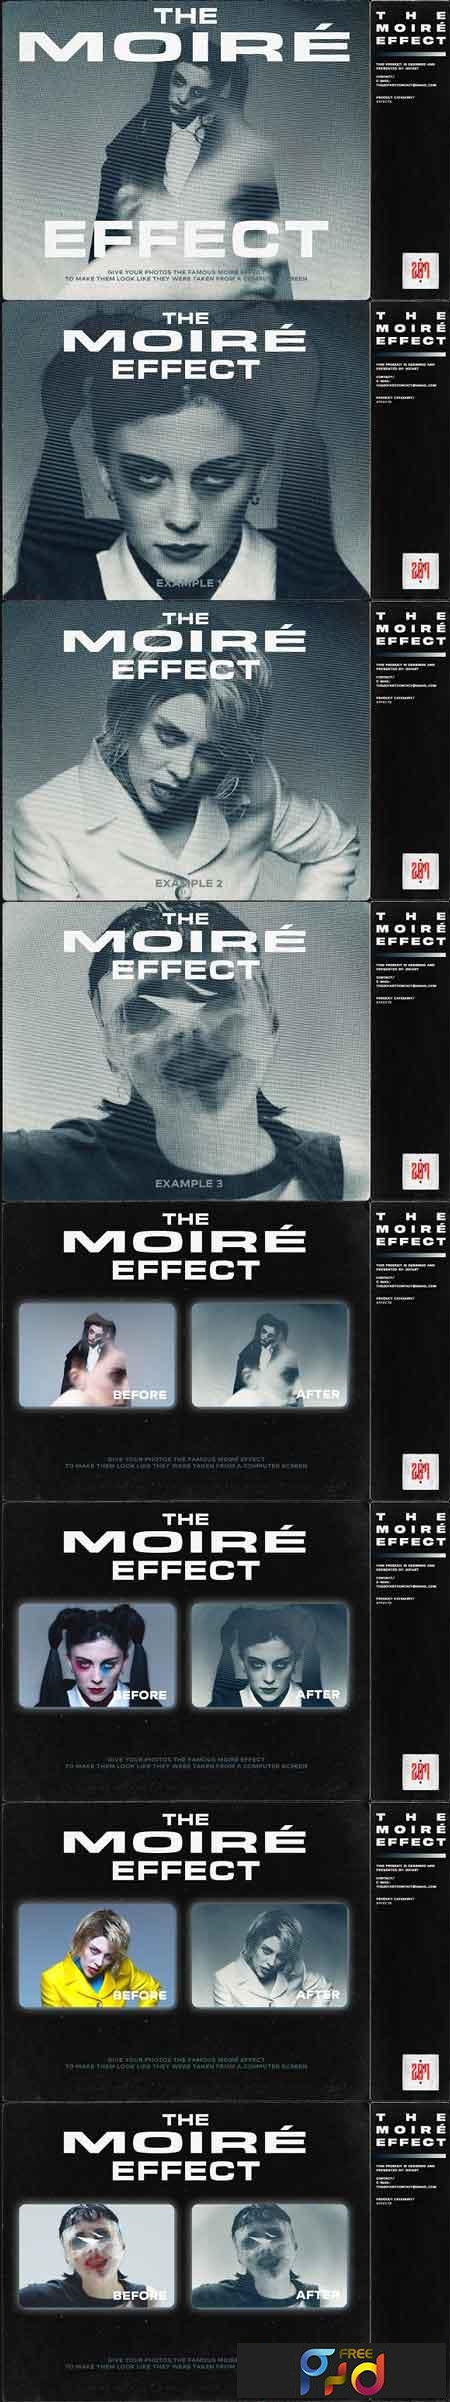 THE MOIRE EFFECT BY 207ART